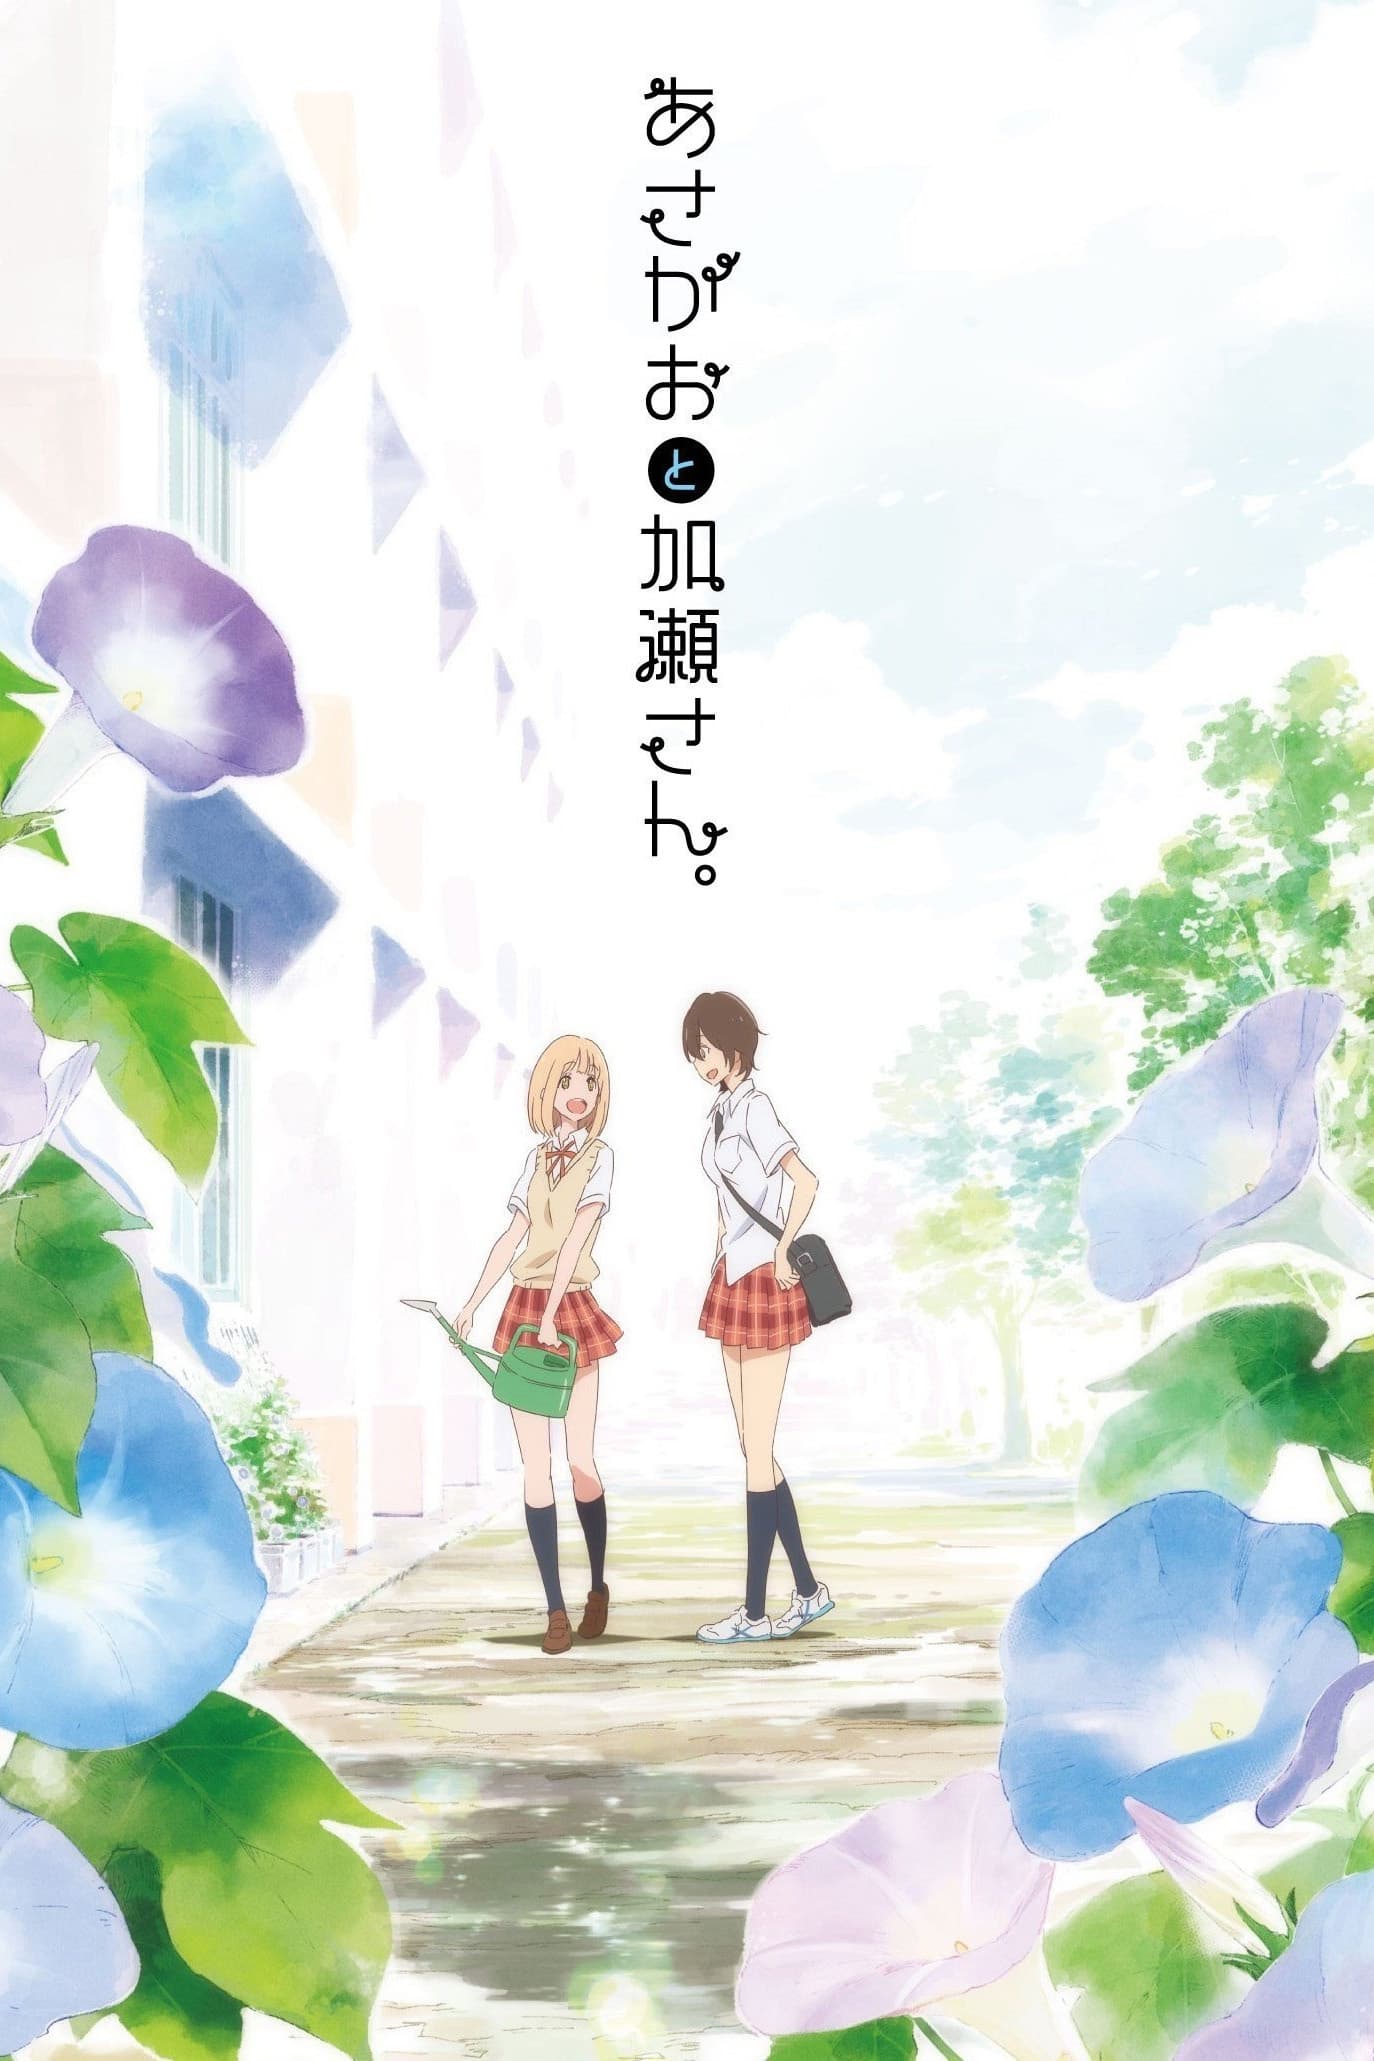 Your Light: Kase-san and Morning Glories